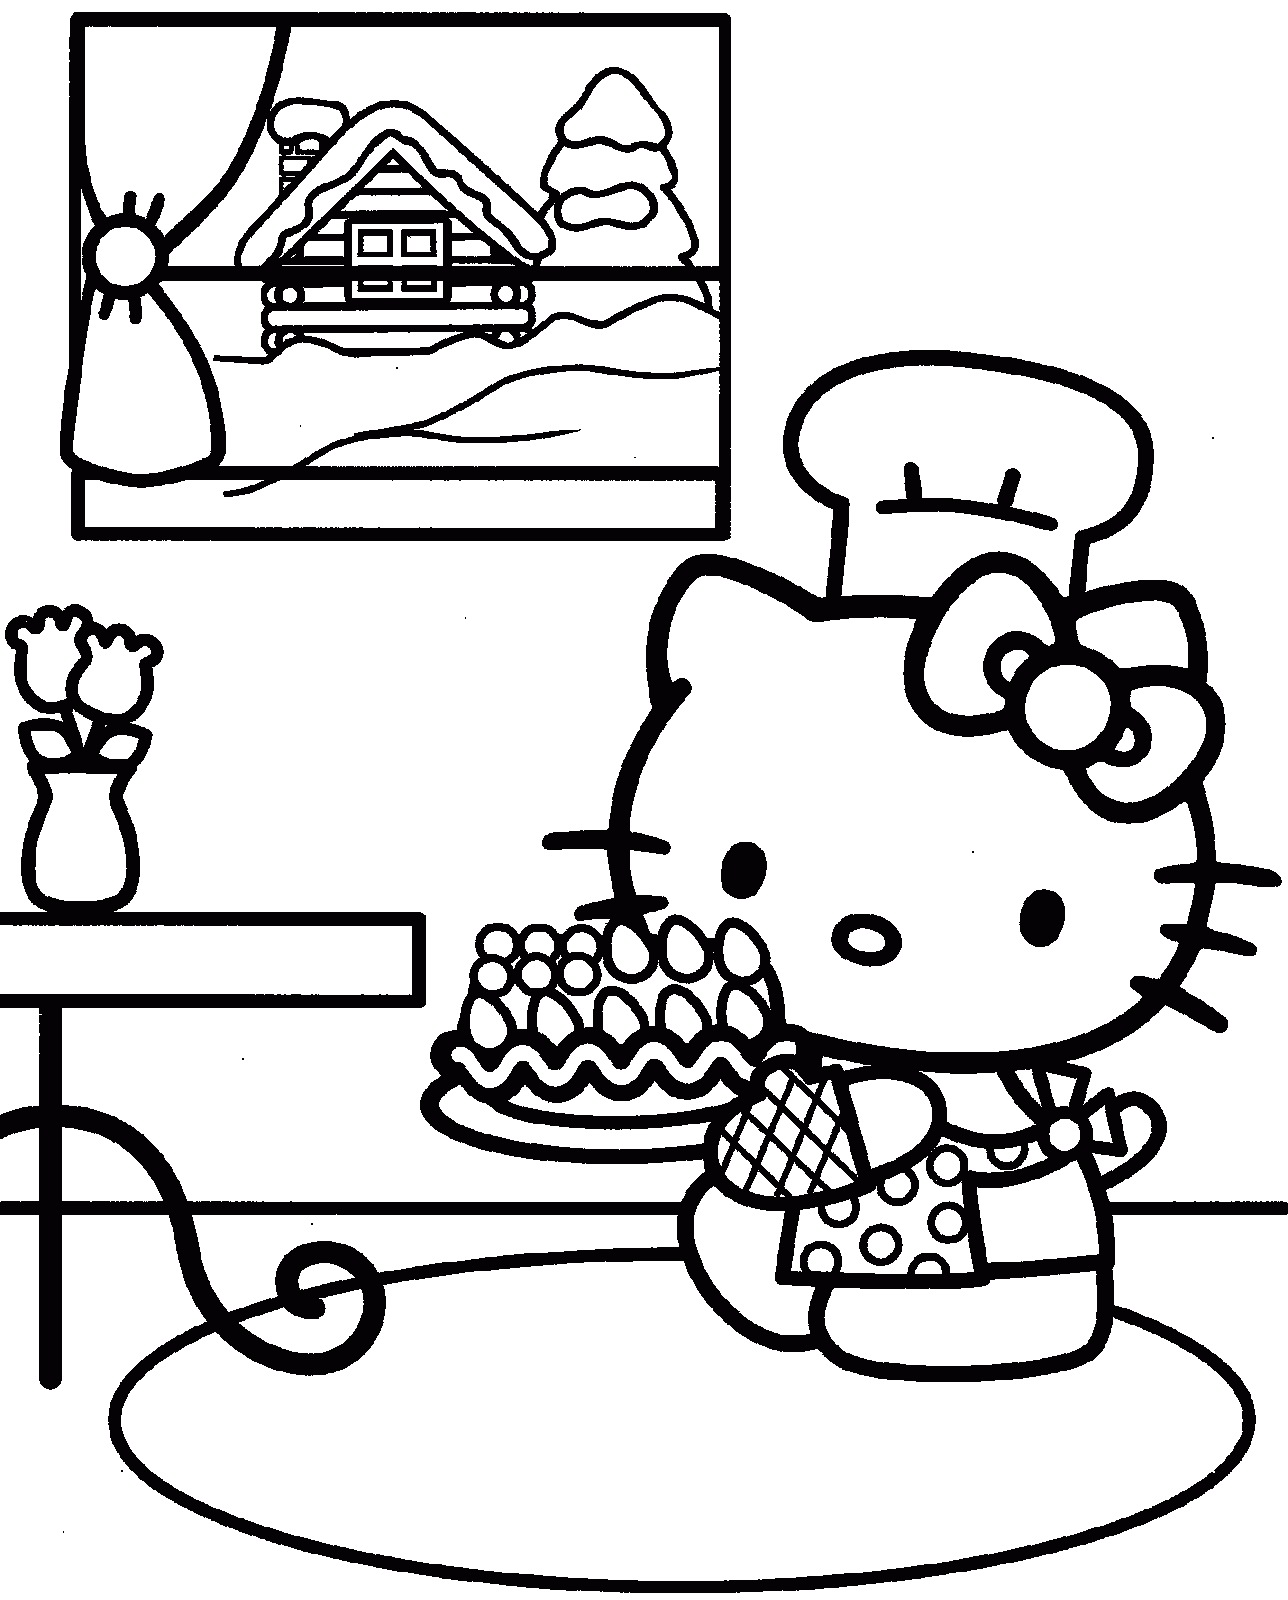 kitty hello coloring pages hello kitty coloring pages 2 hello kitty forever pages coloring kitty hello 